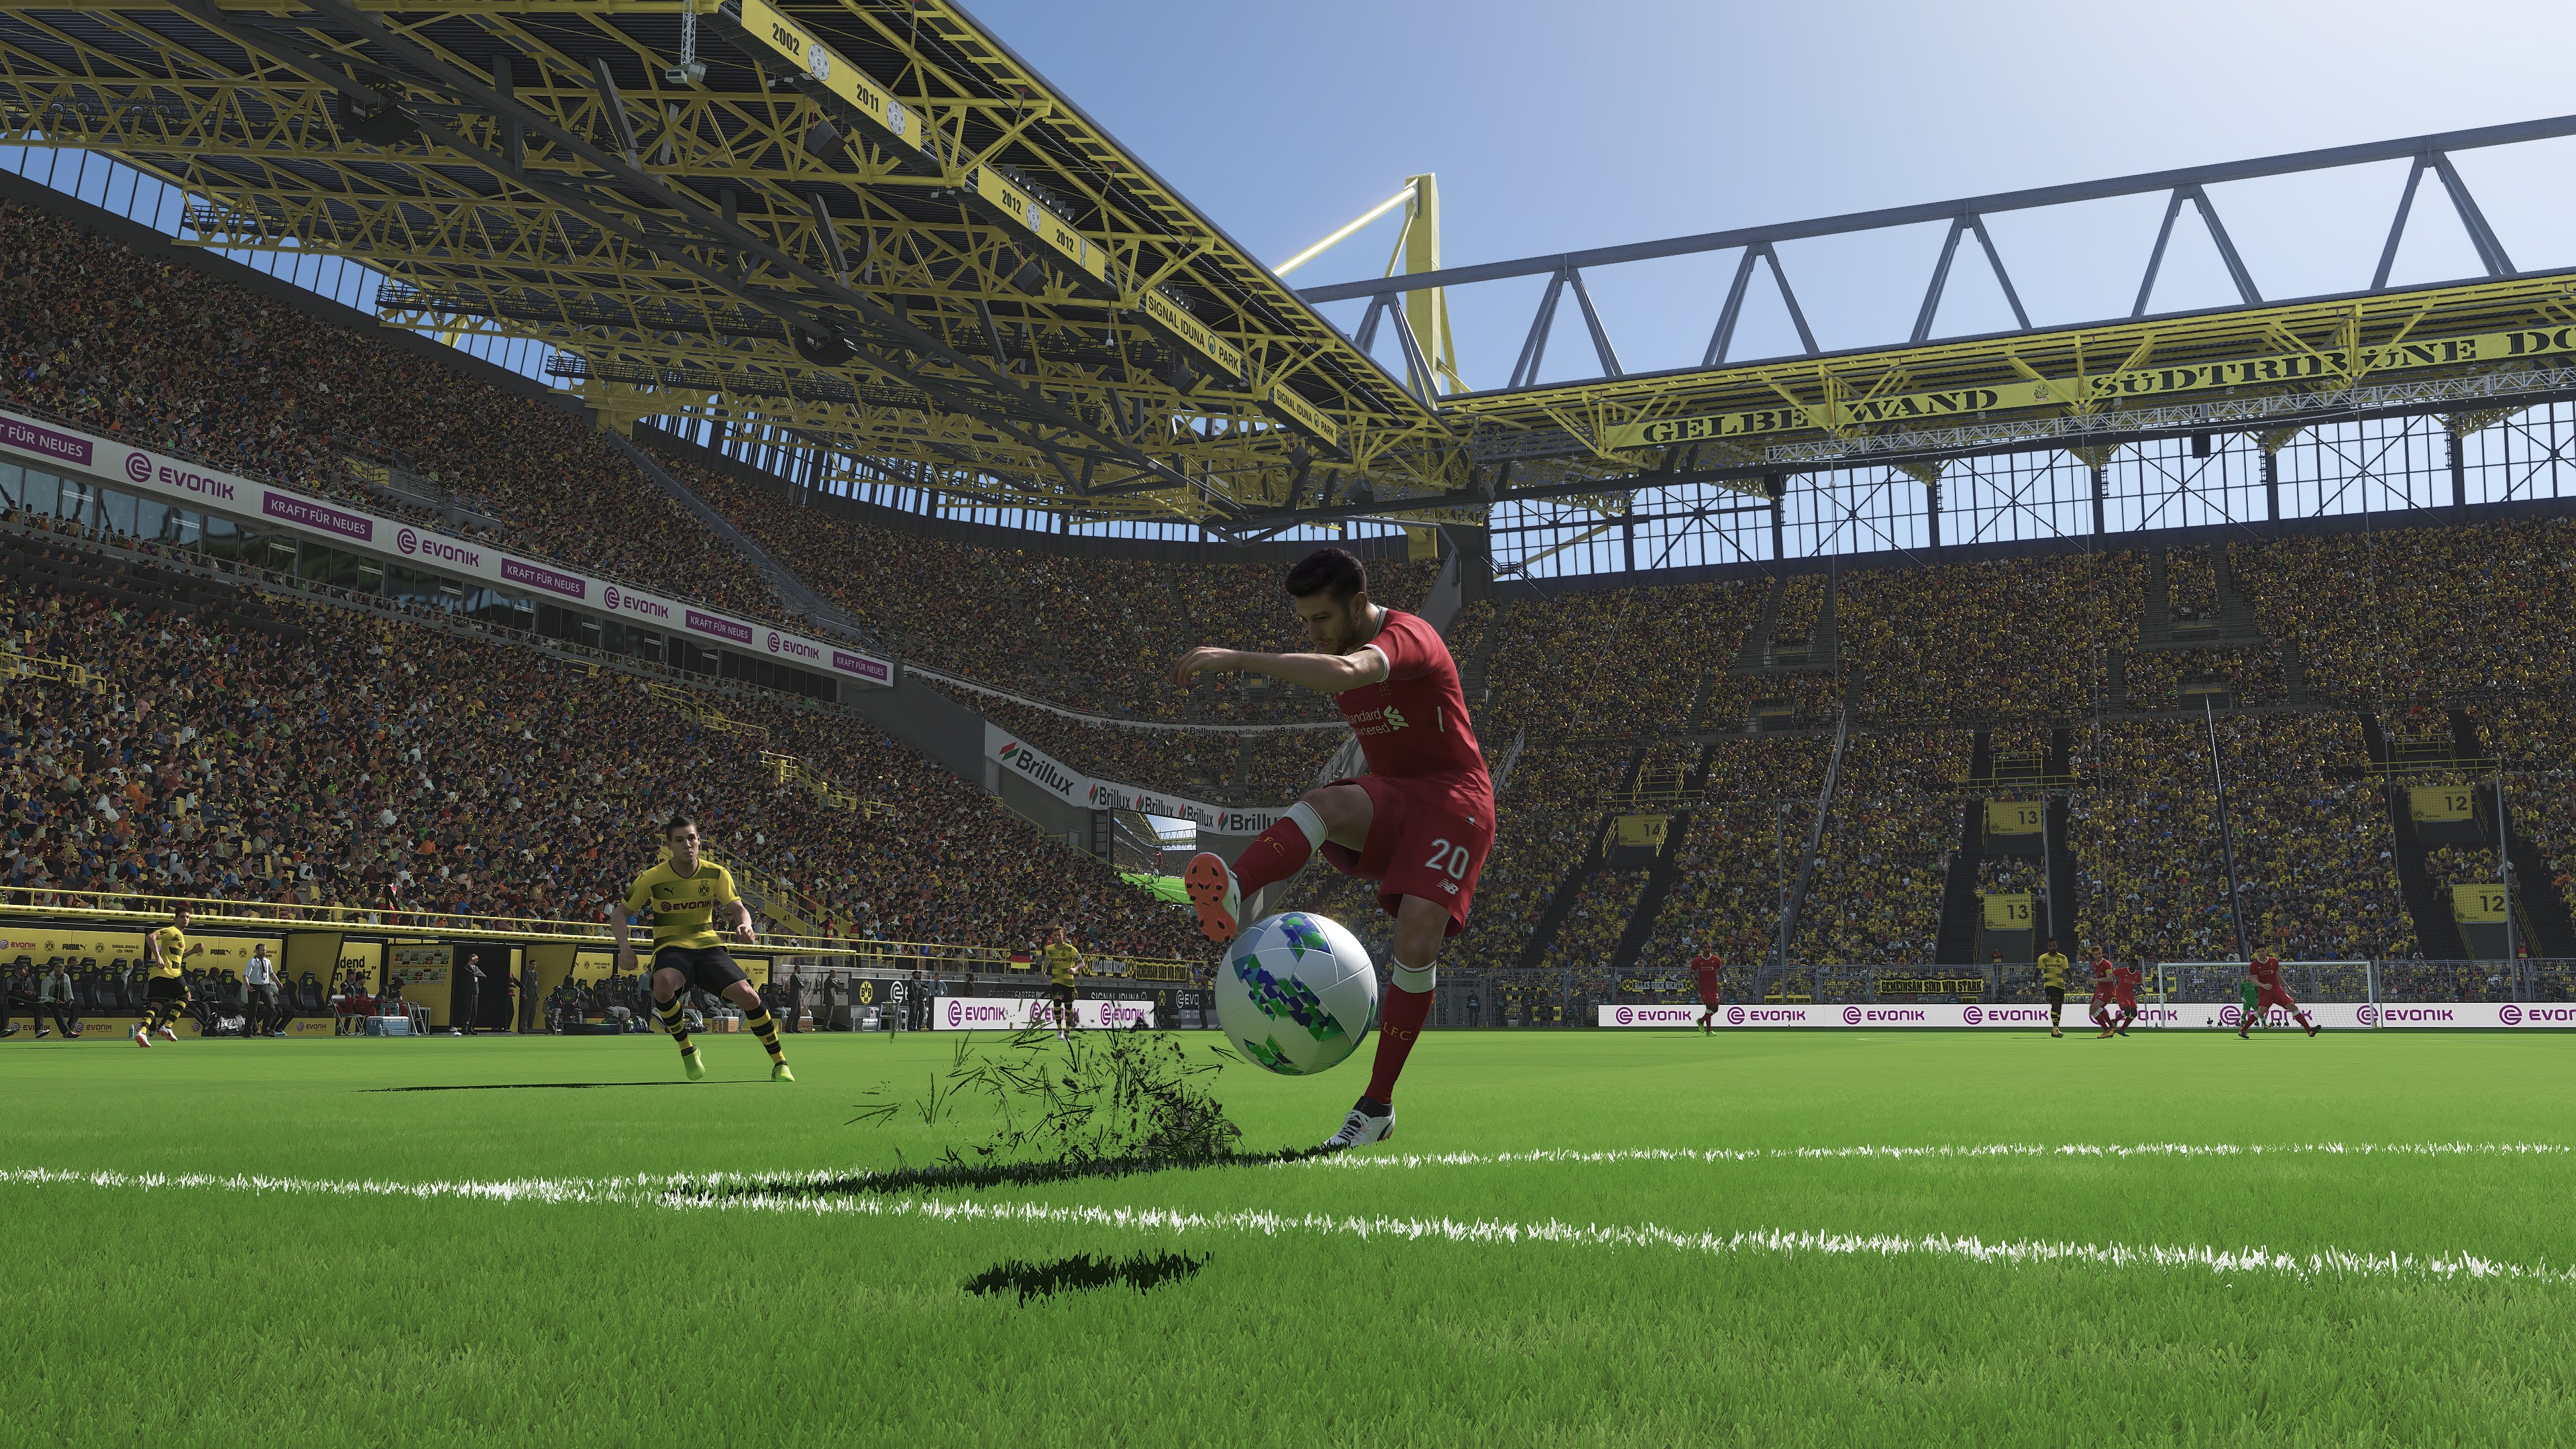 Pro Evolution Soccer 18 is available for PlayStation 3 and 4, Xbox One and 360, and PC.